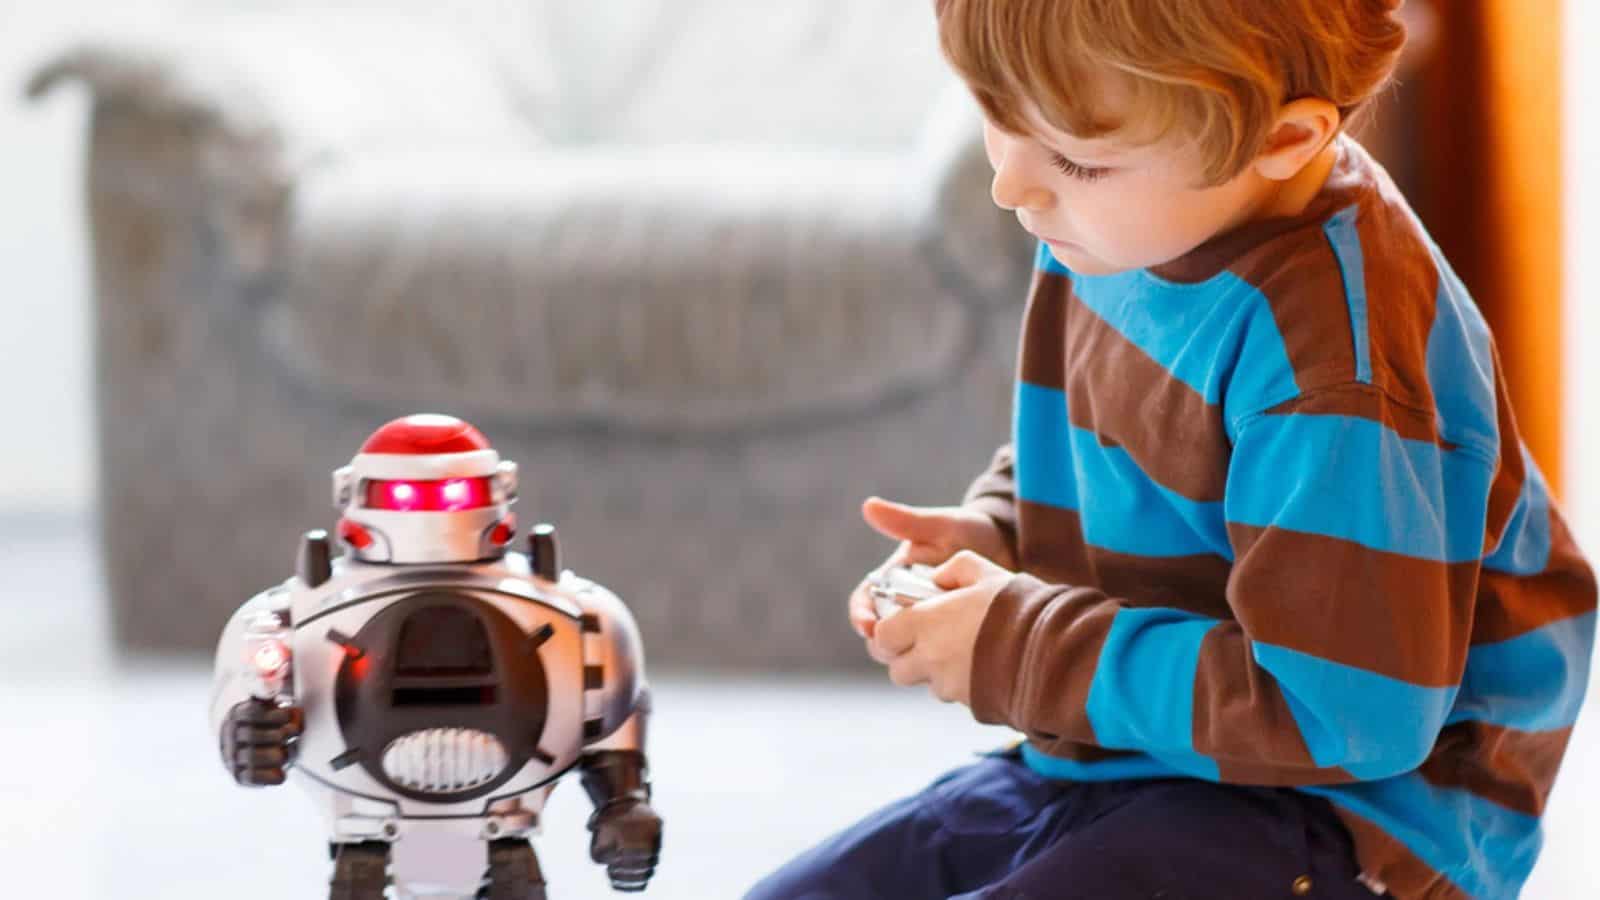 Little blond boy playing with robot toy at home, indoor